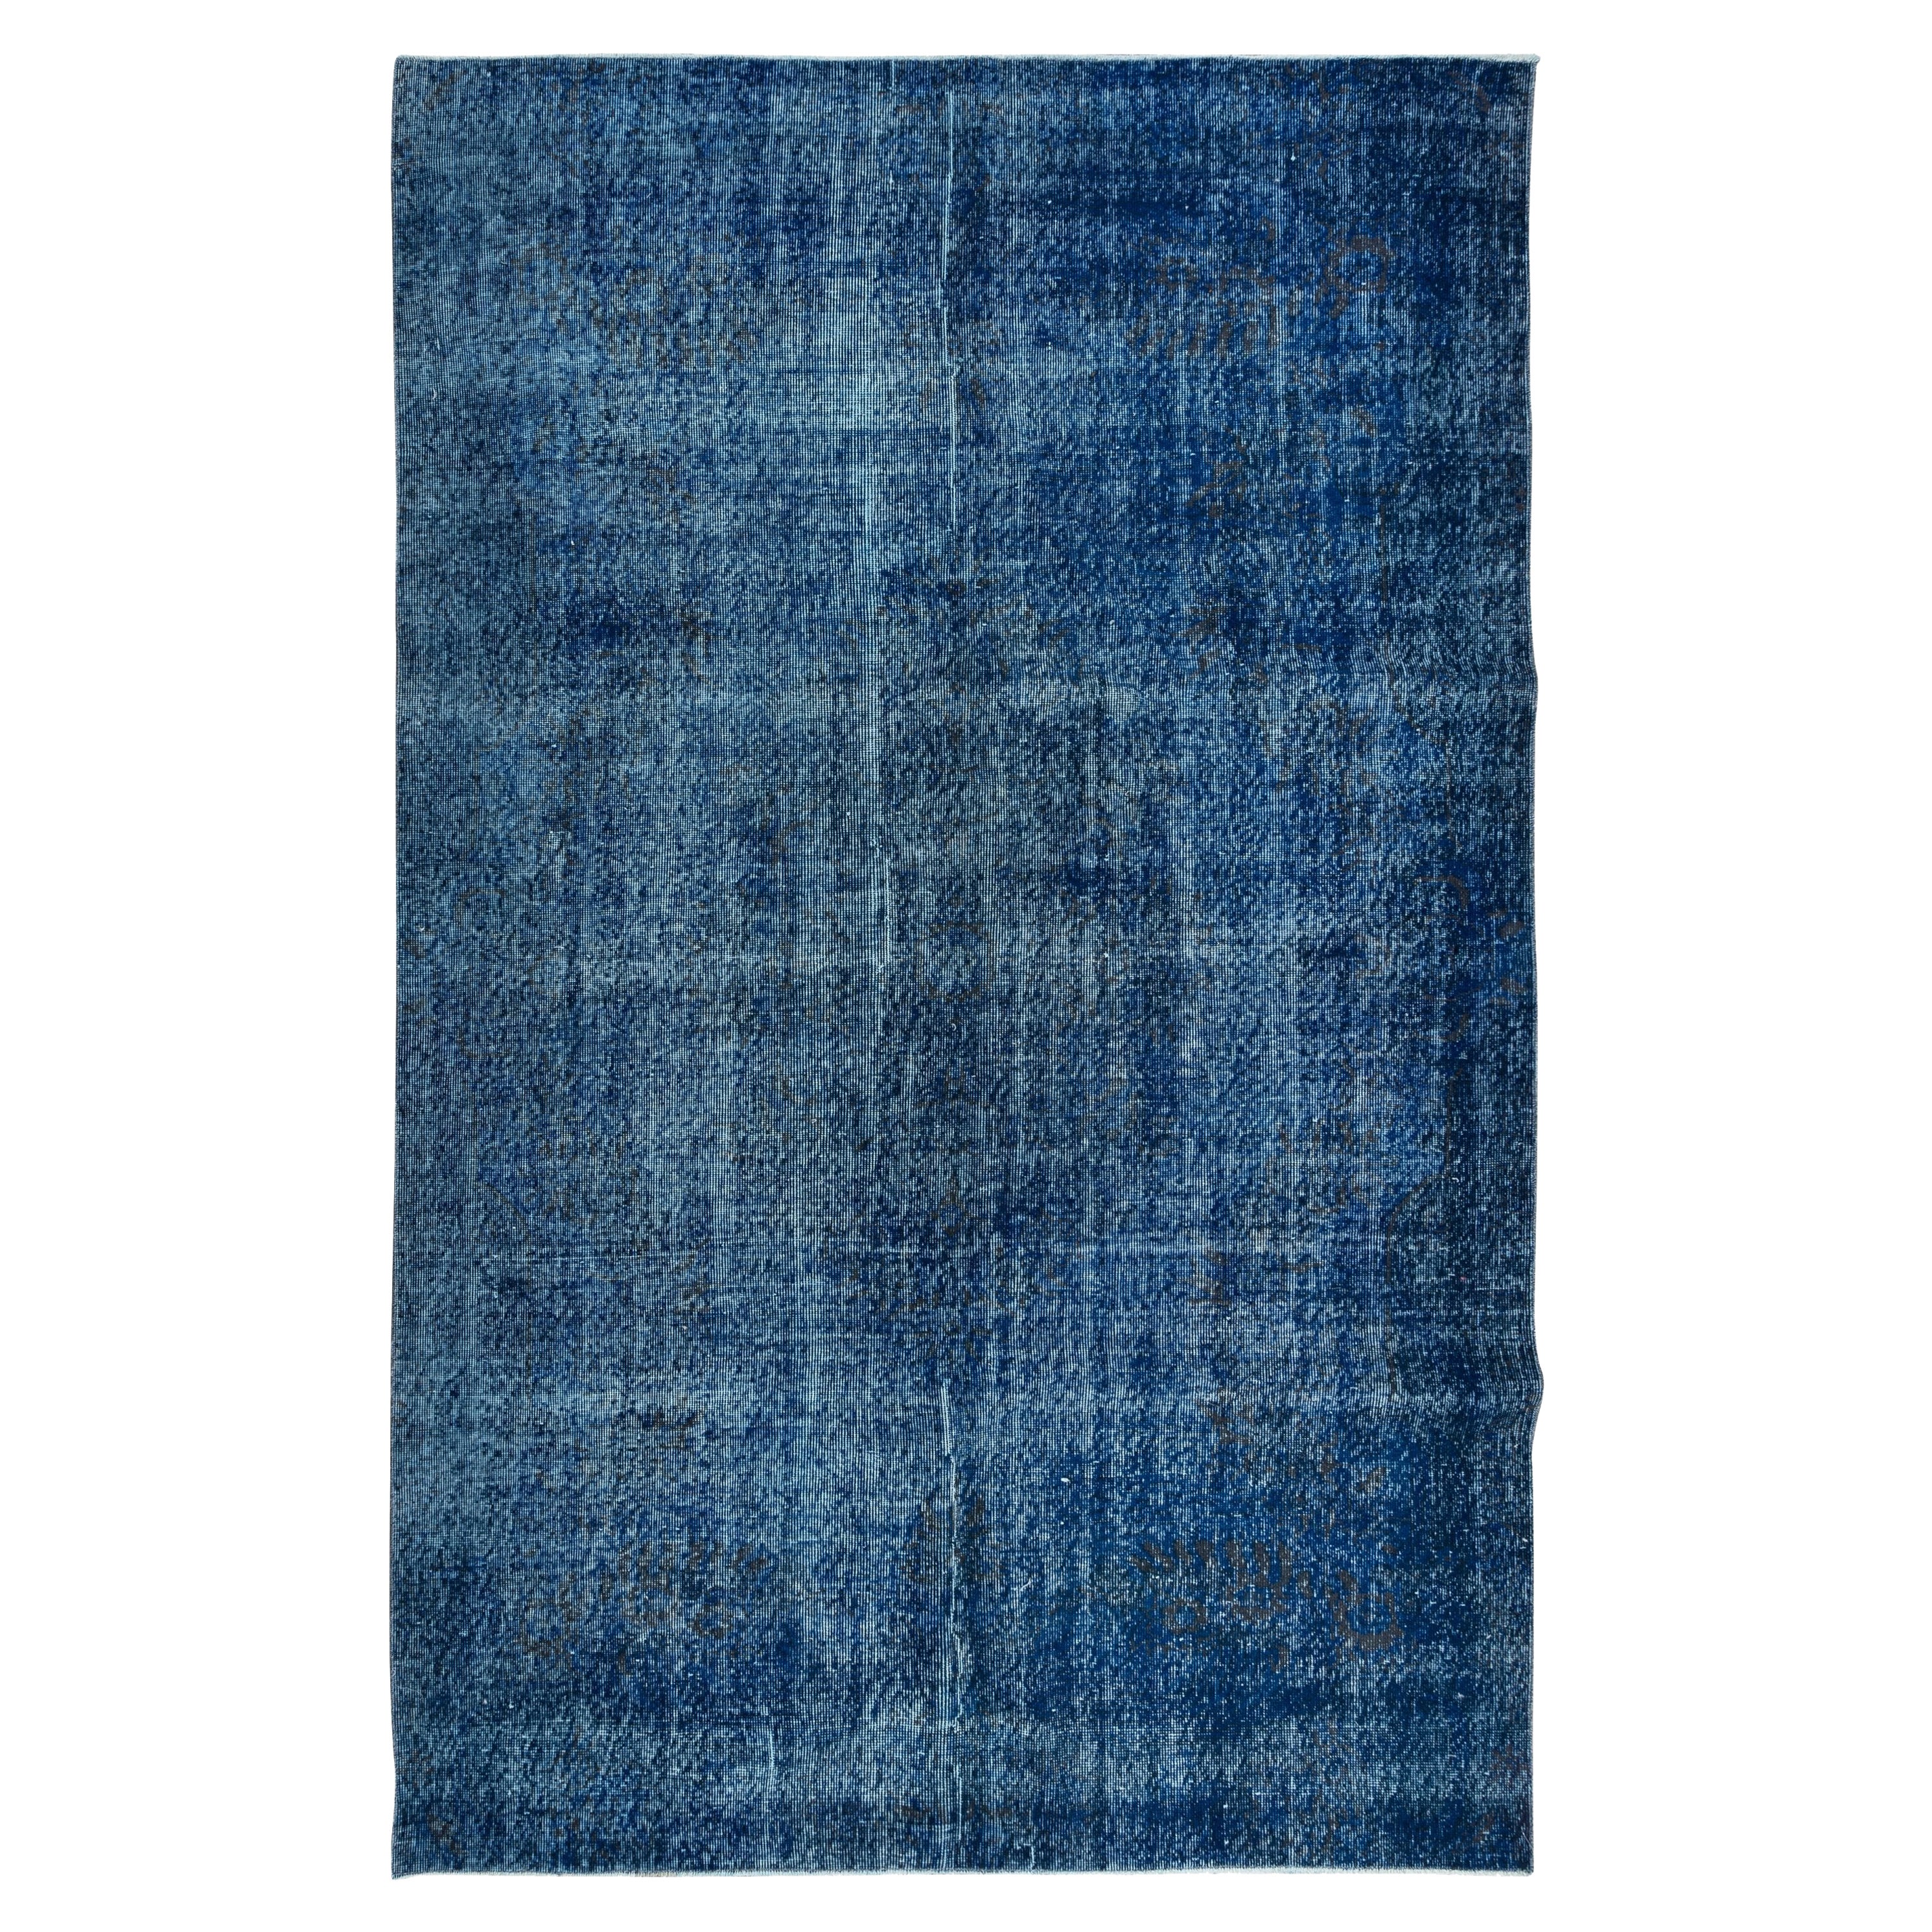 6.2x9.7 Ft Blue Handmade Room Size Rug, Upcycled Turkish Carpet, Floor Covering For Sale